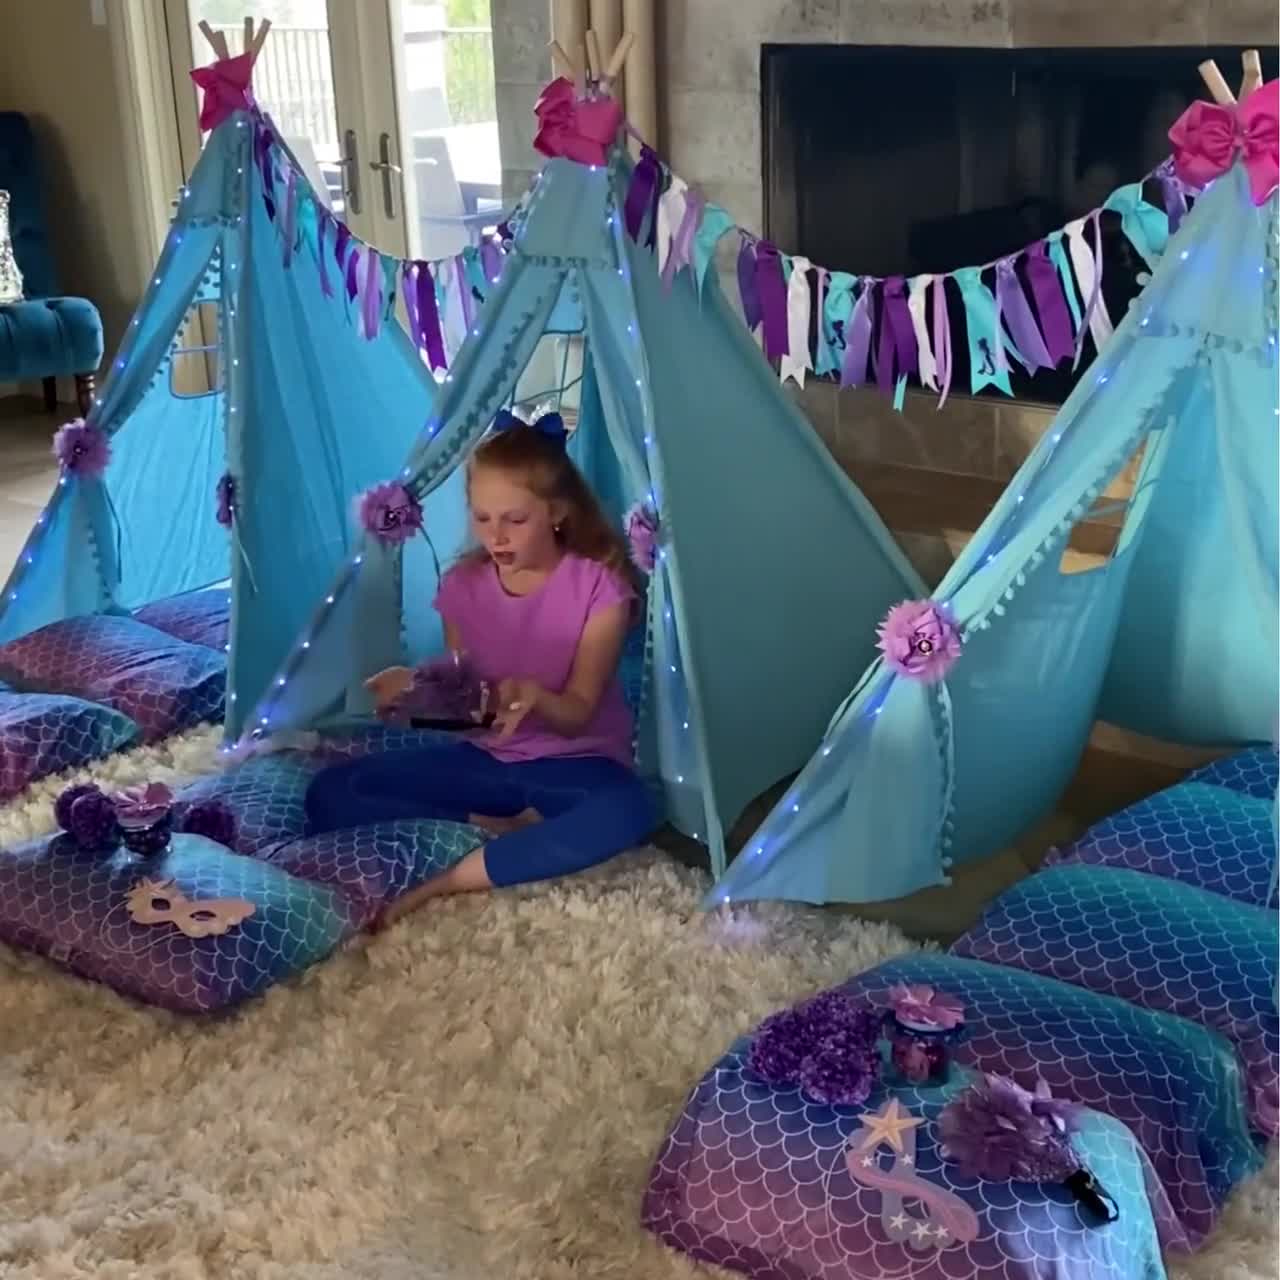 Mermaid Glamping Teepee Tent Sleepover Party in a Box 